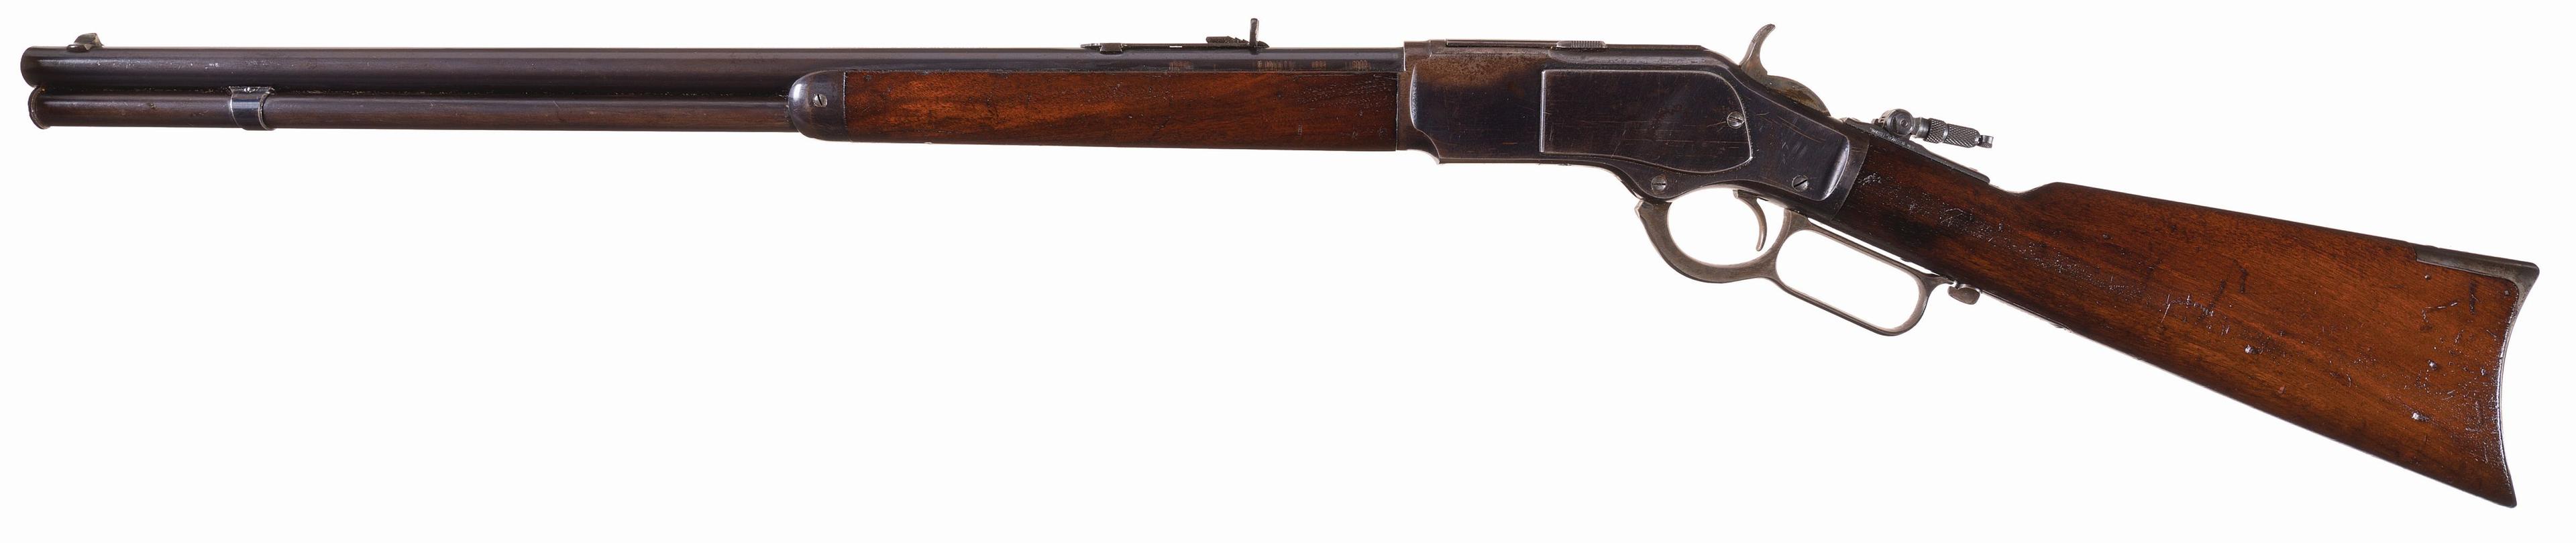 Winchester Model 1873 Sporting Rifle